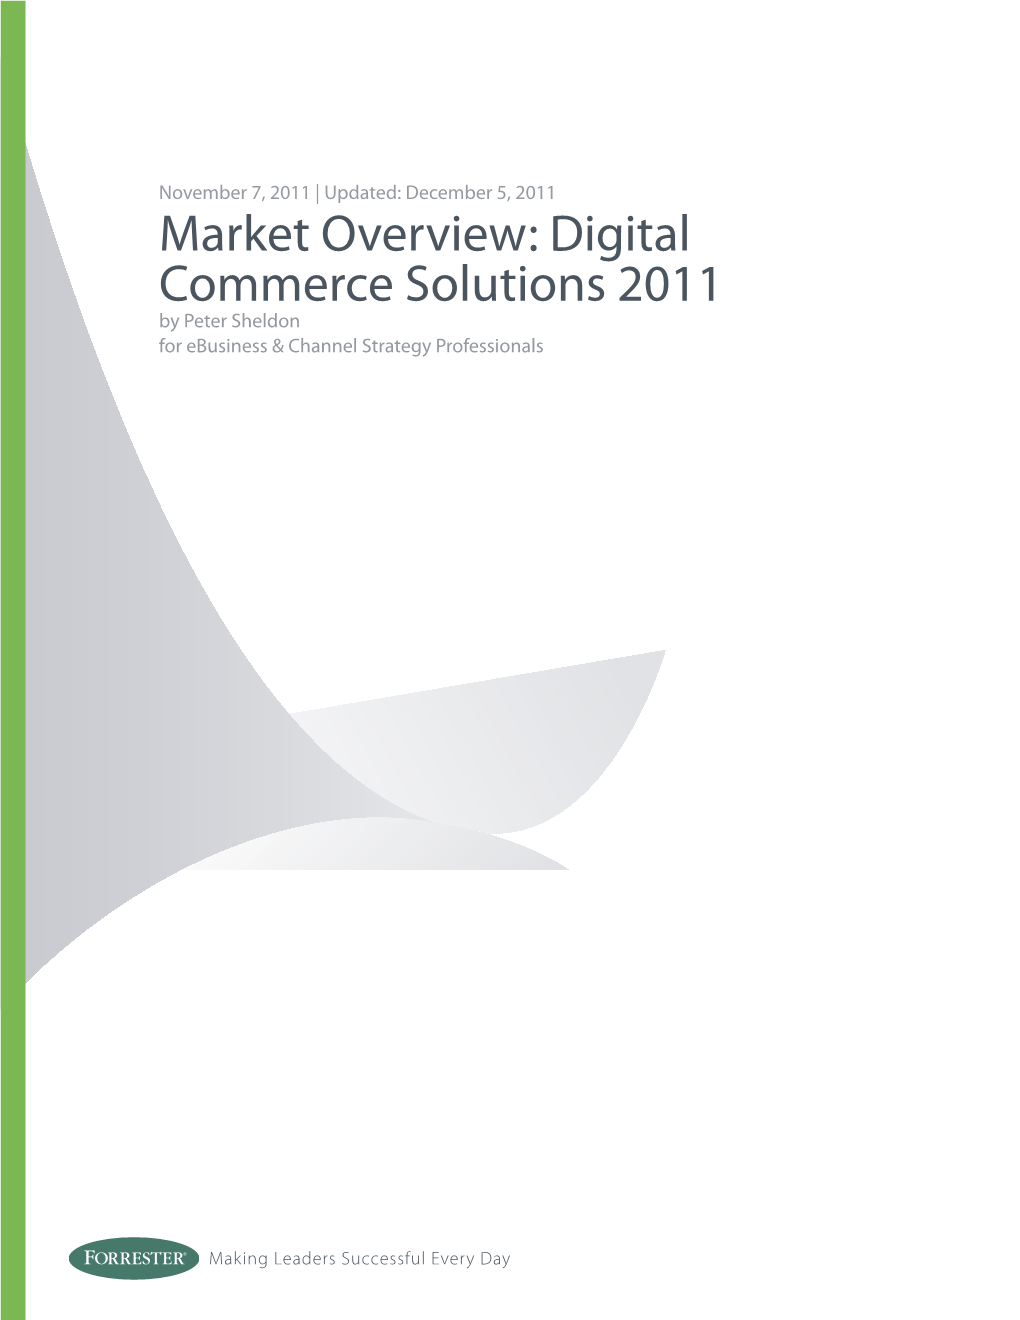 Market Overview: Digital Commerce Solutions 2011 by Peter Sheldon for Ebusiness & Channel Strategy Professionals